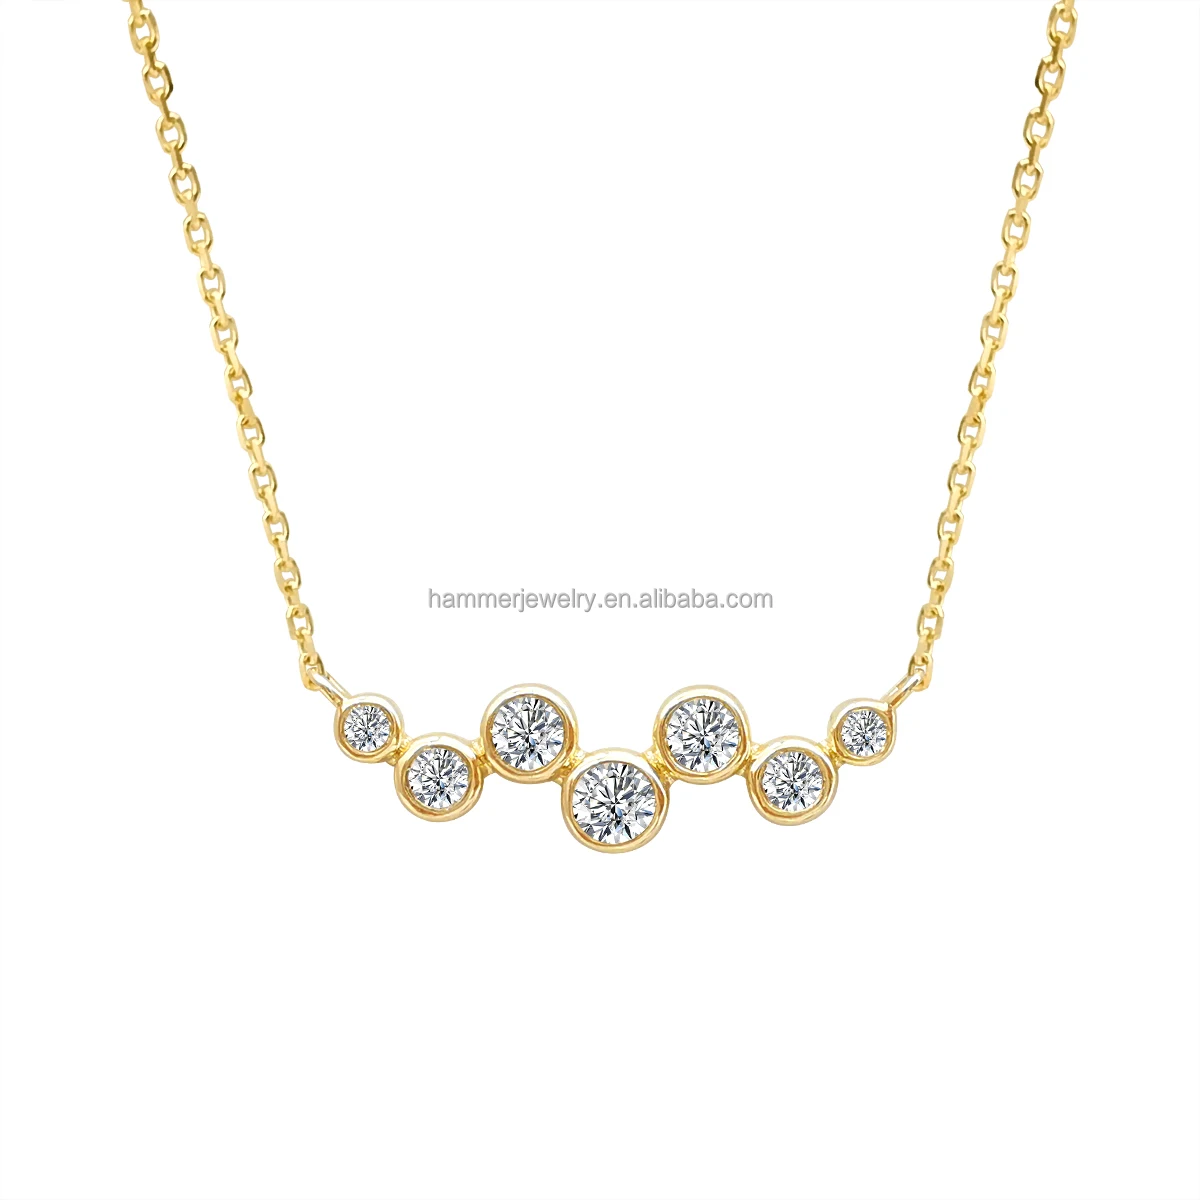 

2023 New Arrival Solid 14k Gold Necklace for Women Dainty Lab-Grown Diamond Link Chain Jewelry with Stone Main Material